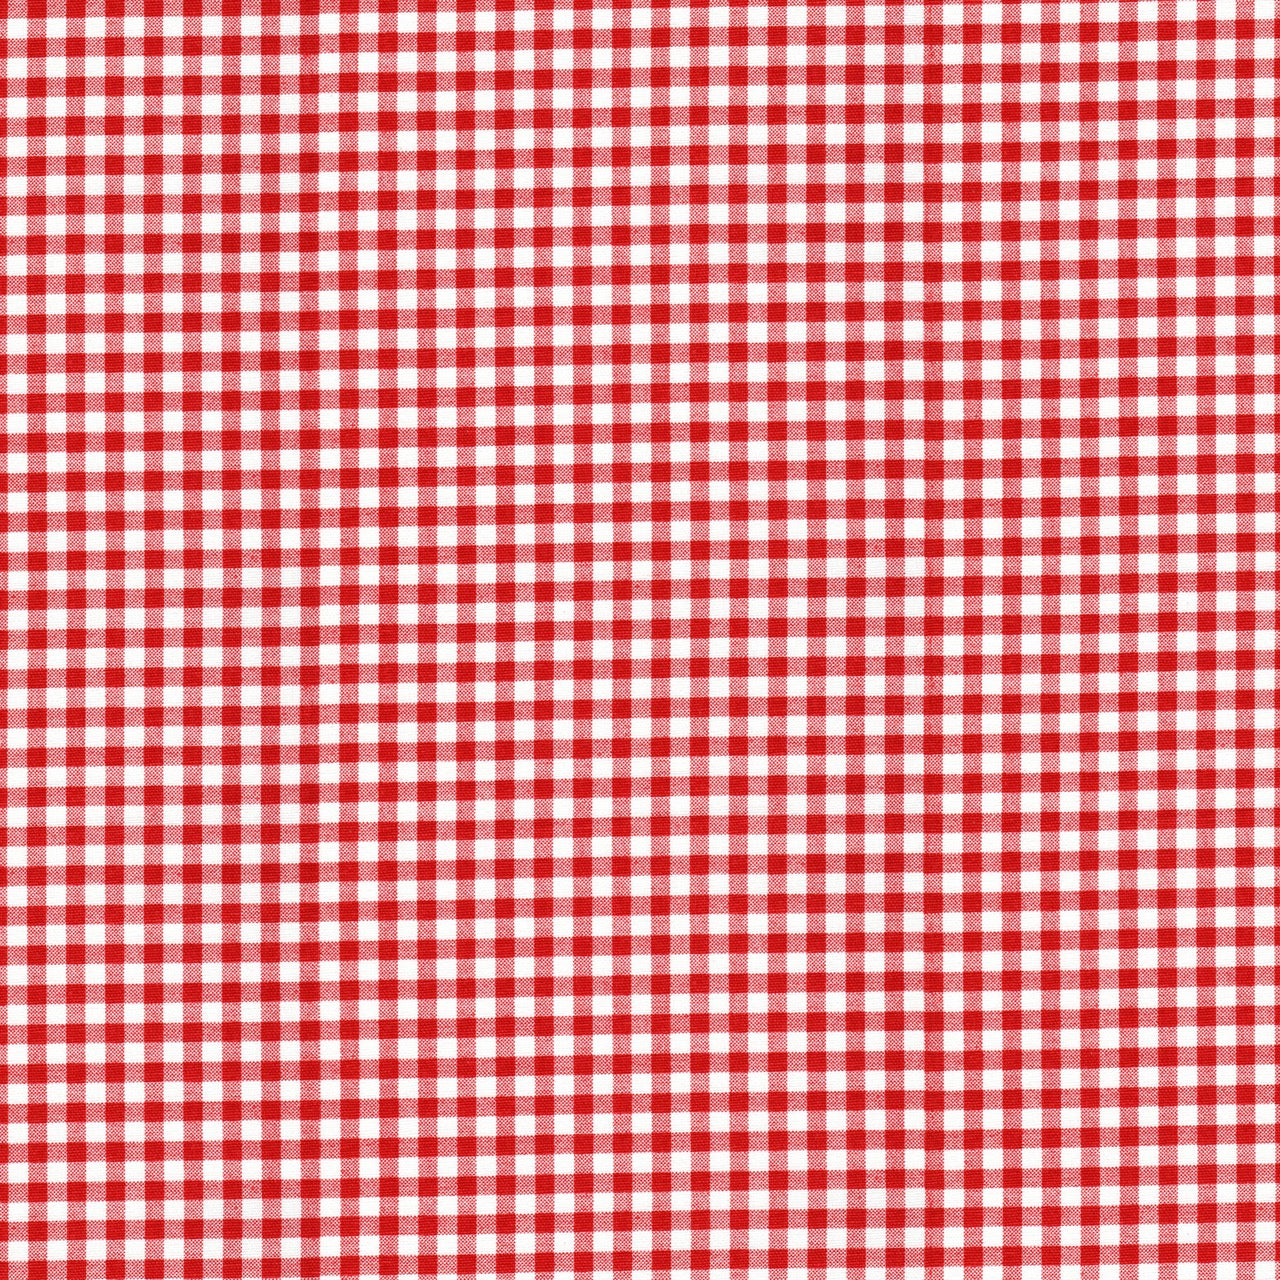 Round Tablecloth in Lipstick Red Large Gingham Check on White